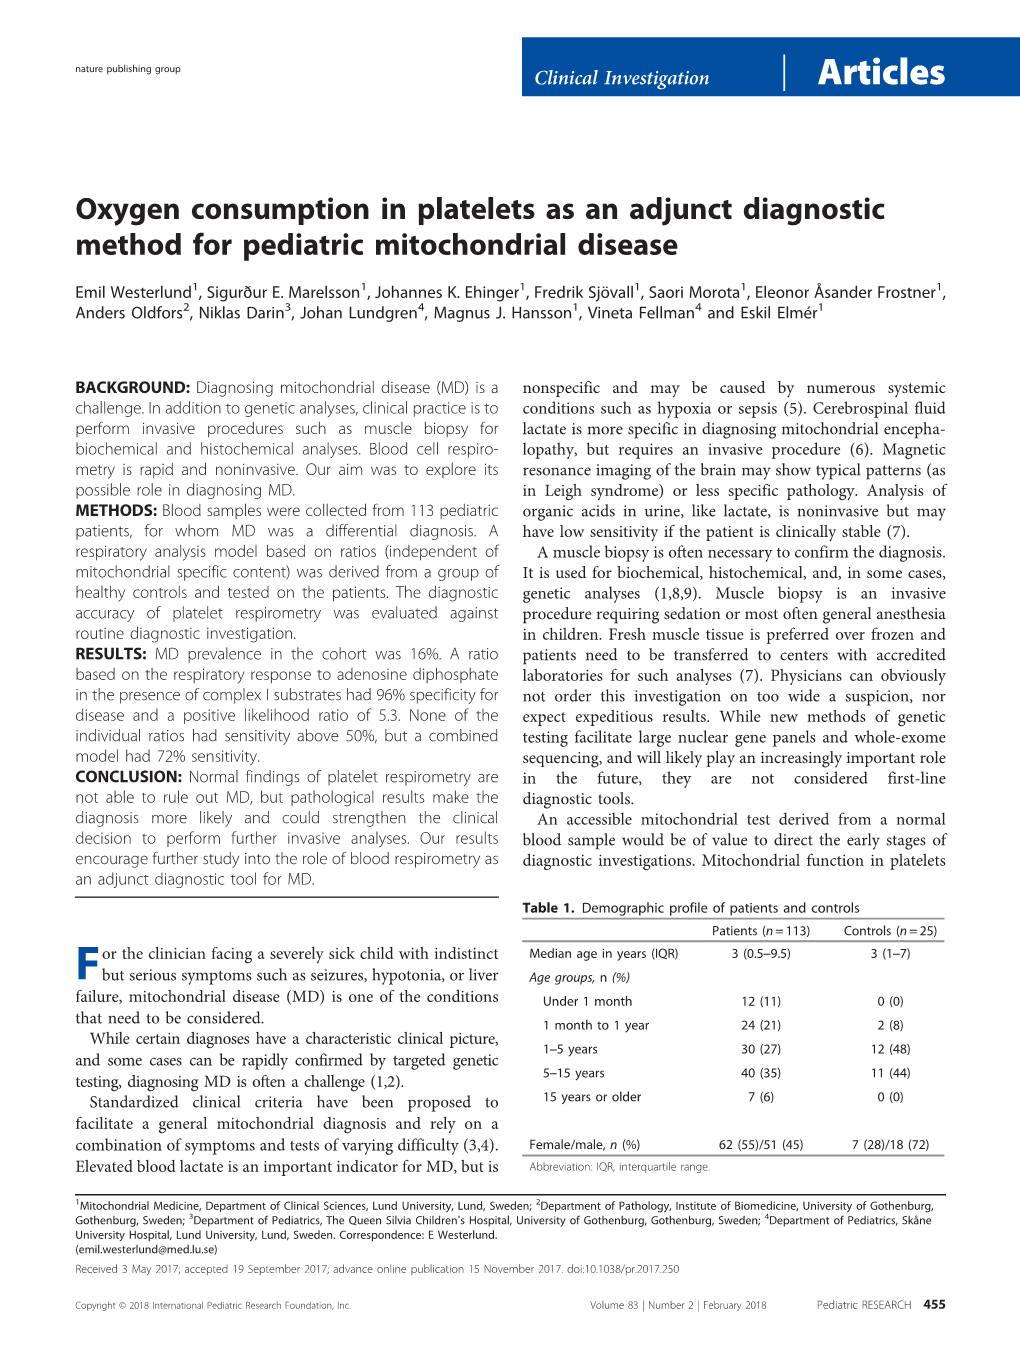 Oxygen Consumption in Platelets As an Adjunct Diagnostic Method for Pediatric Mitochondrial Disease